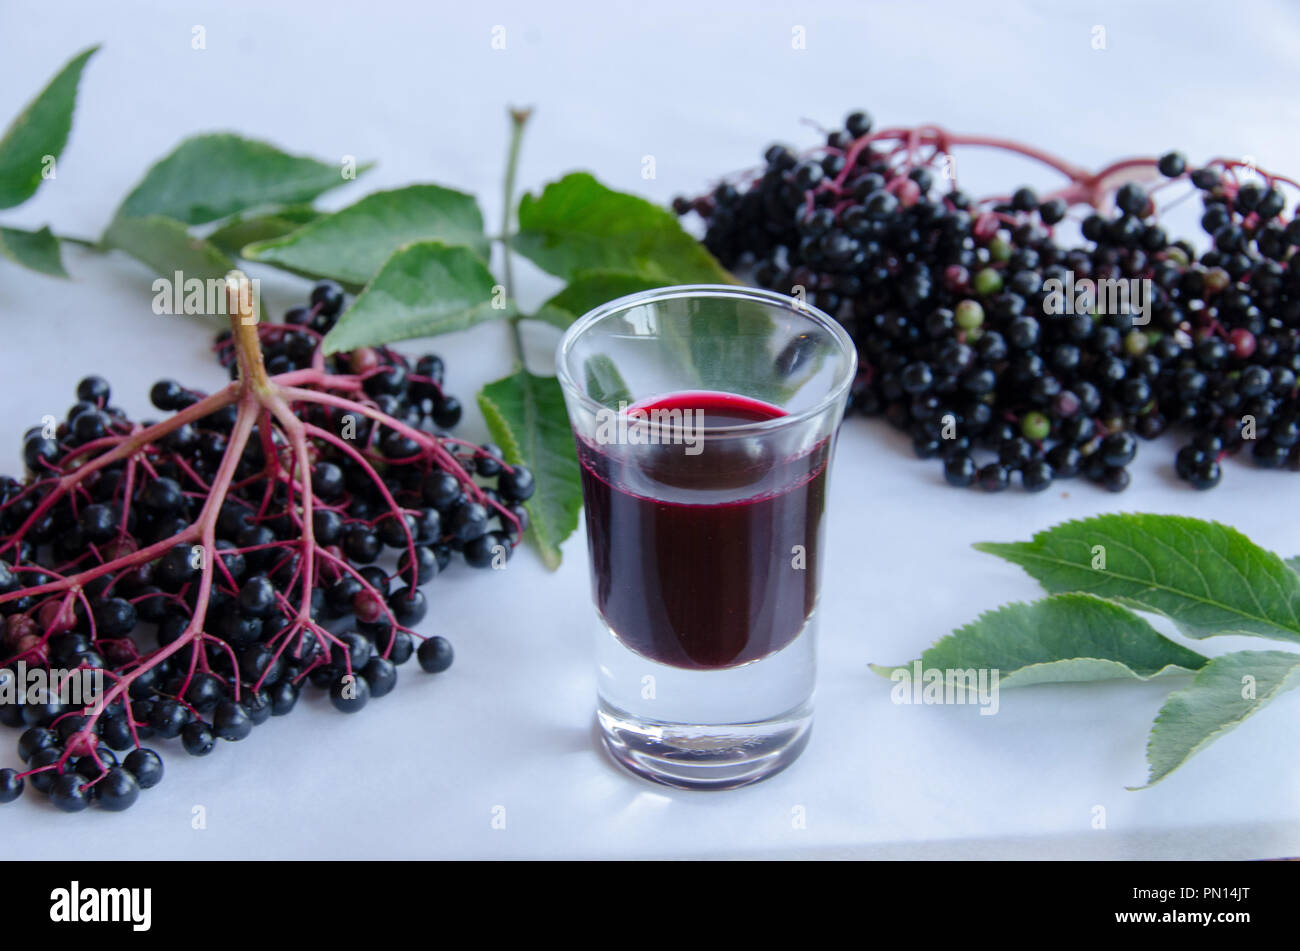 Elderberry branches and leaves with a shot of elderberry vinegar on white background Stock Photo